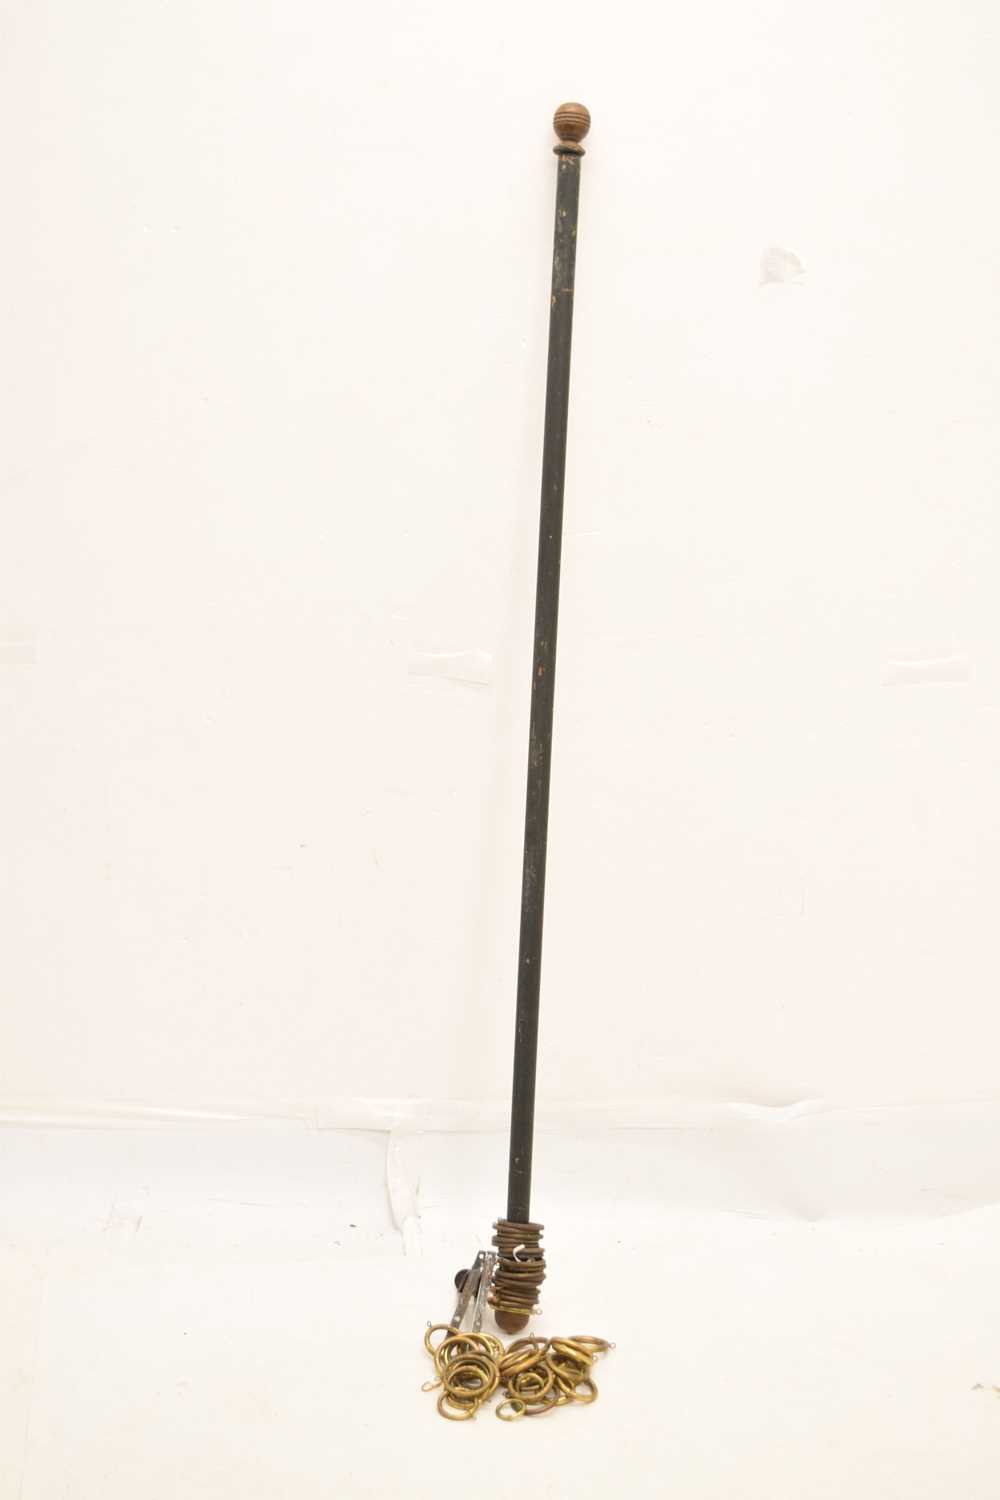 Slim wooden curtain pole - Image 7 of 7